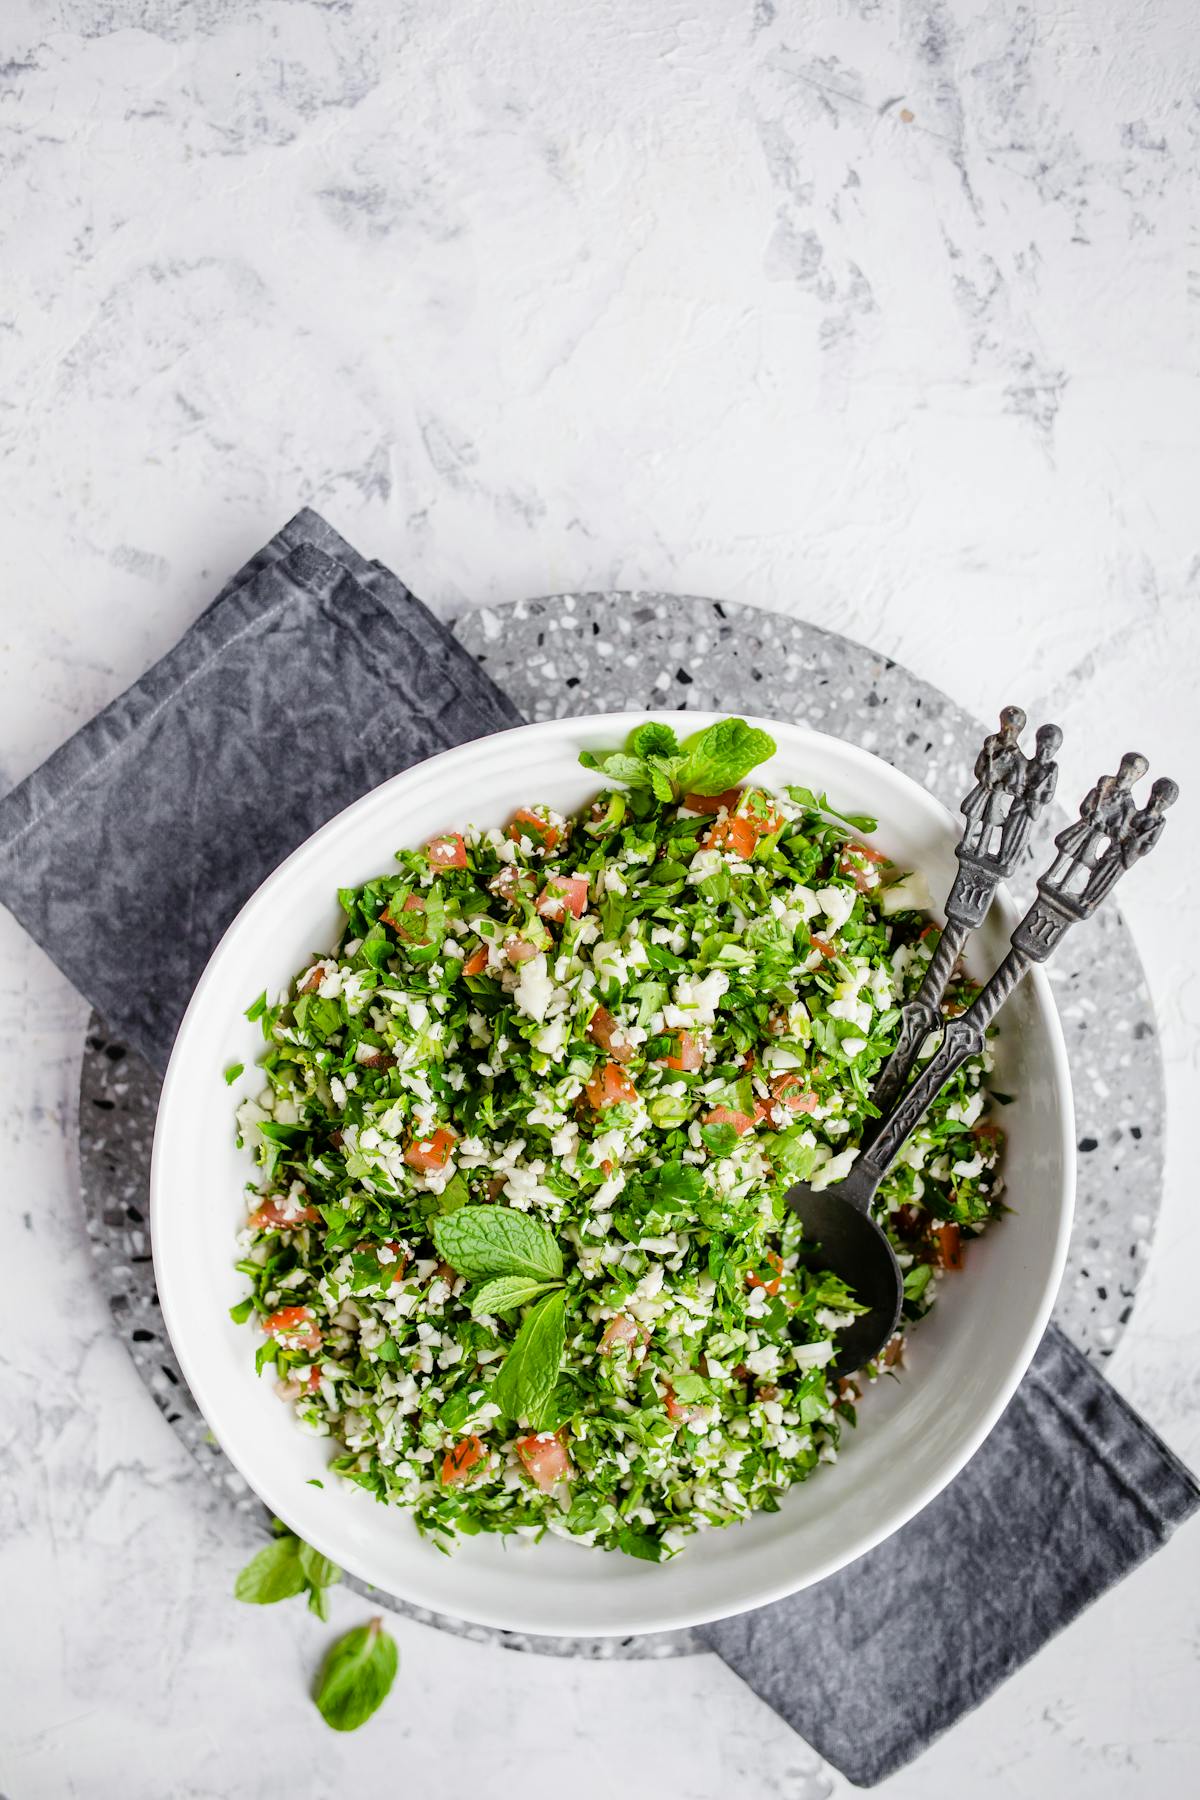 Low carb tabouleh (Middle eastern parsley salad)